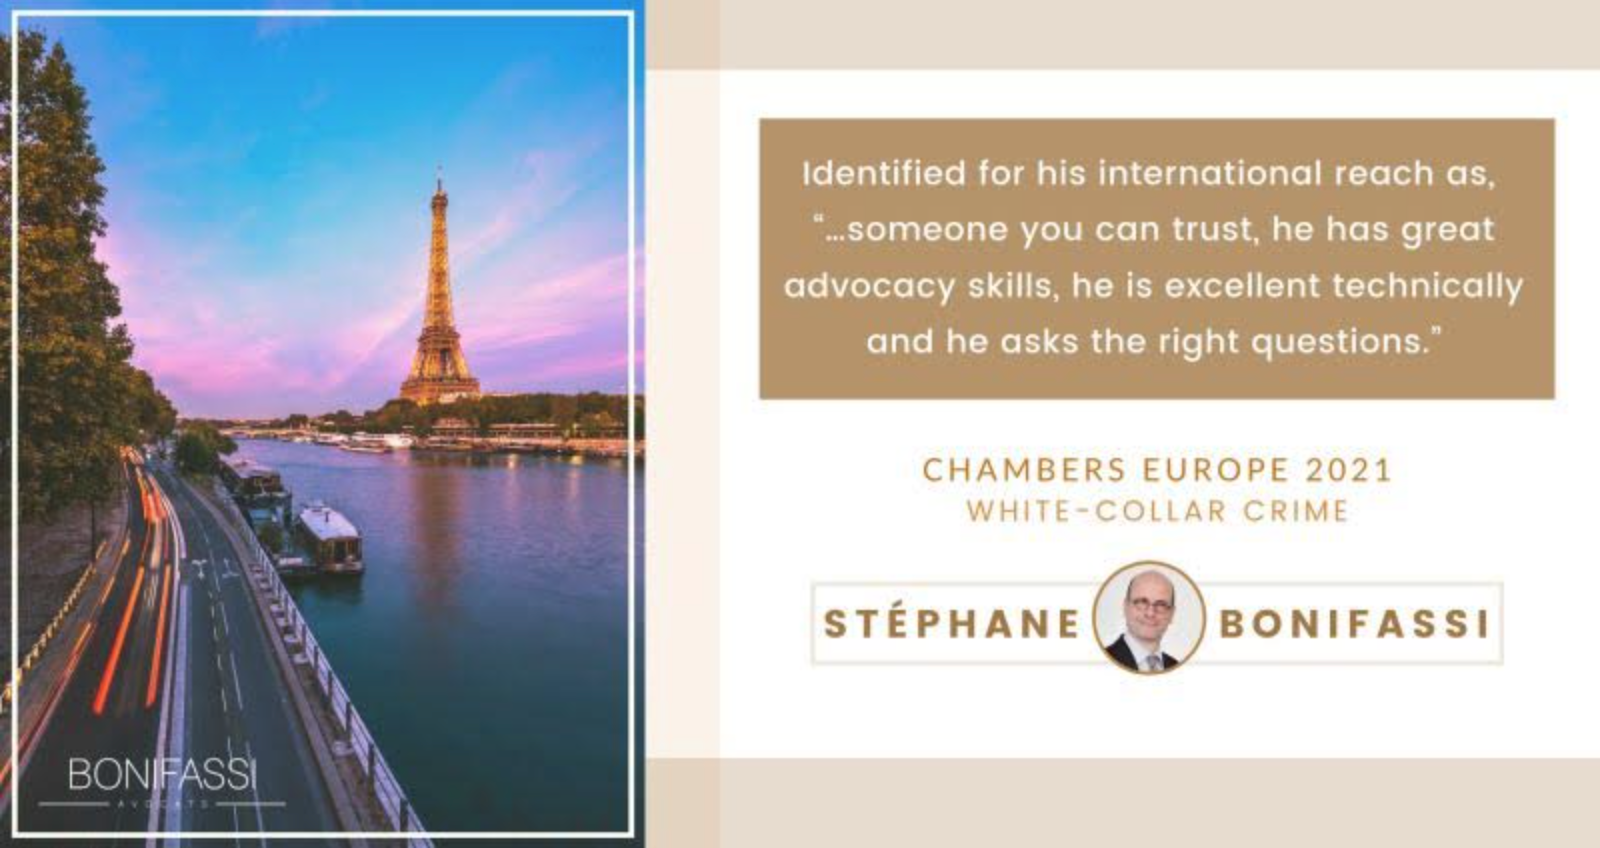 Stéphane Bonifassi recognized by Chambers Europe